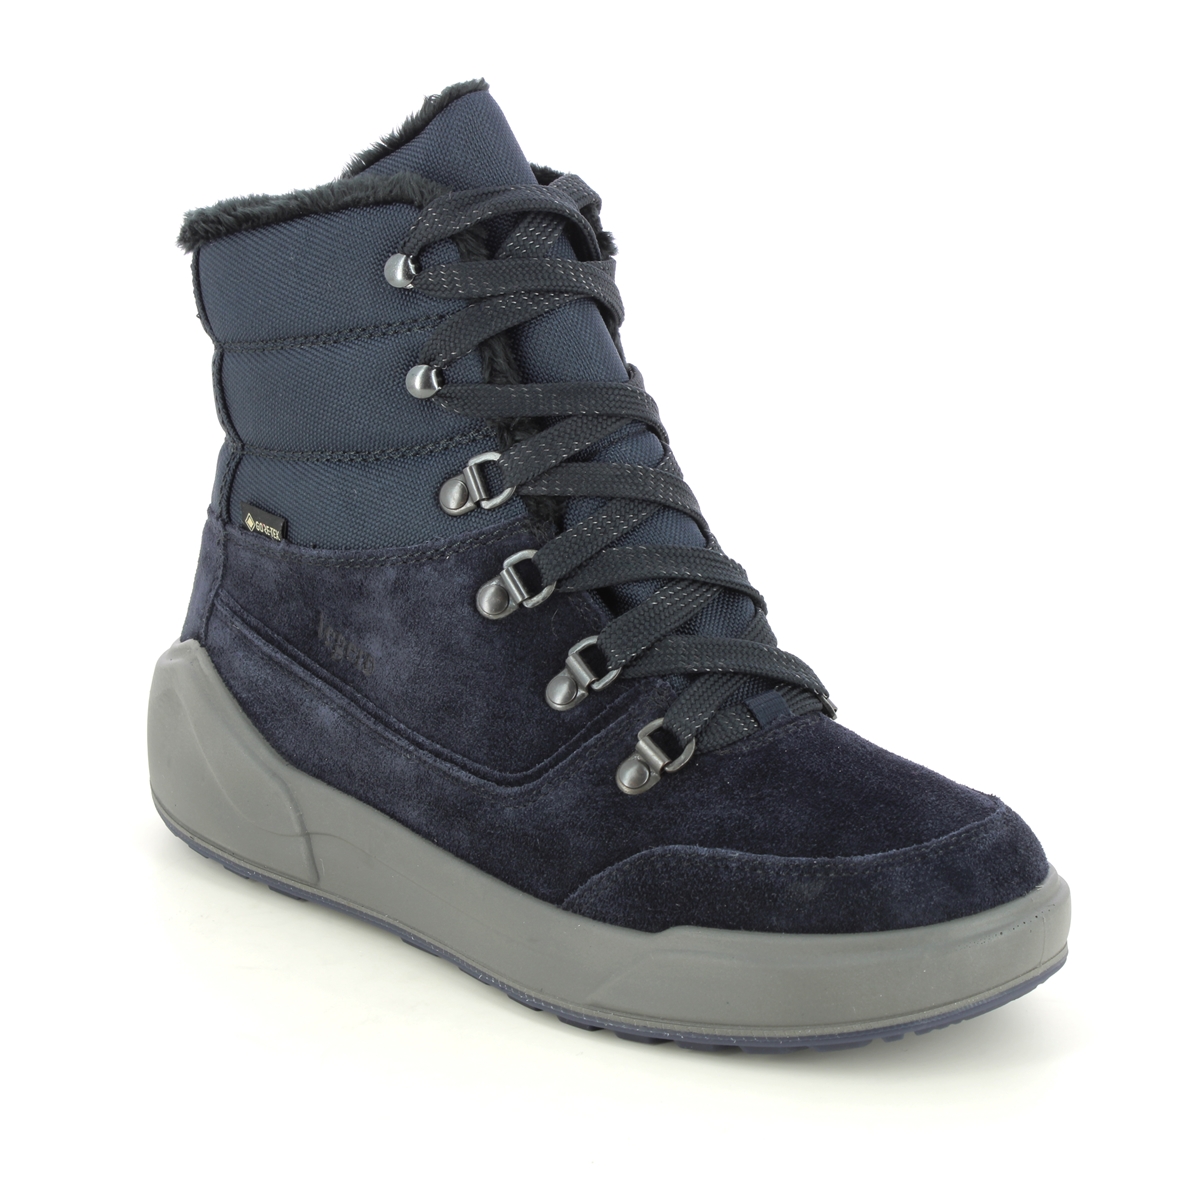 Legero Cosy Lace Gtx Navy Suede Womens Winter Boots 2000286-8000 In Size 6.5 In Plain Navy Suede